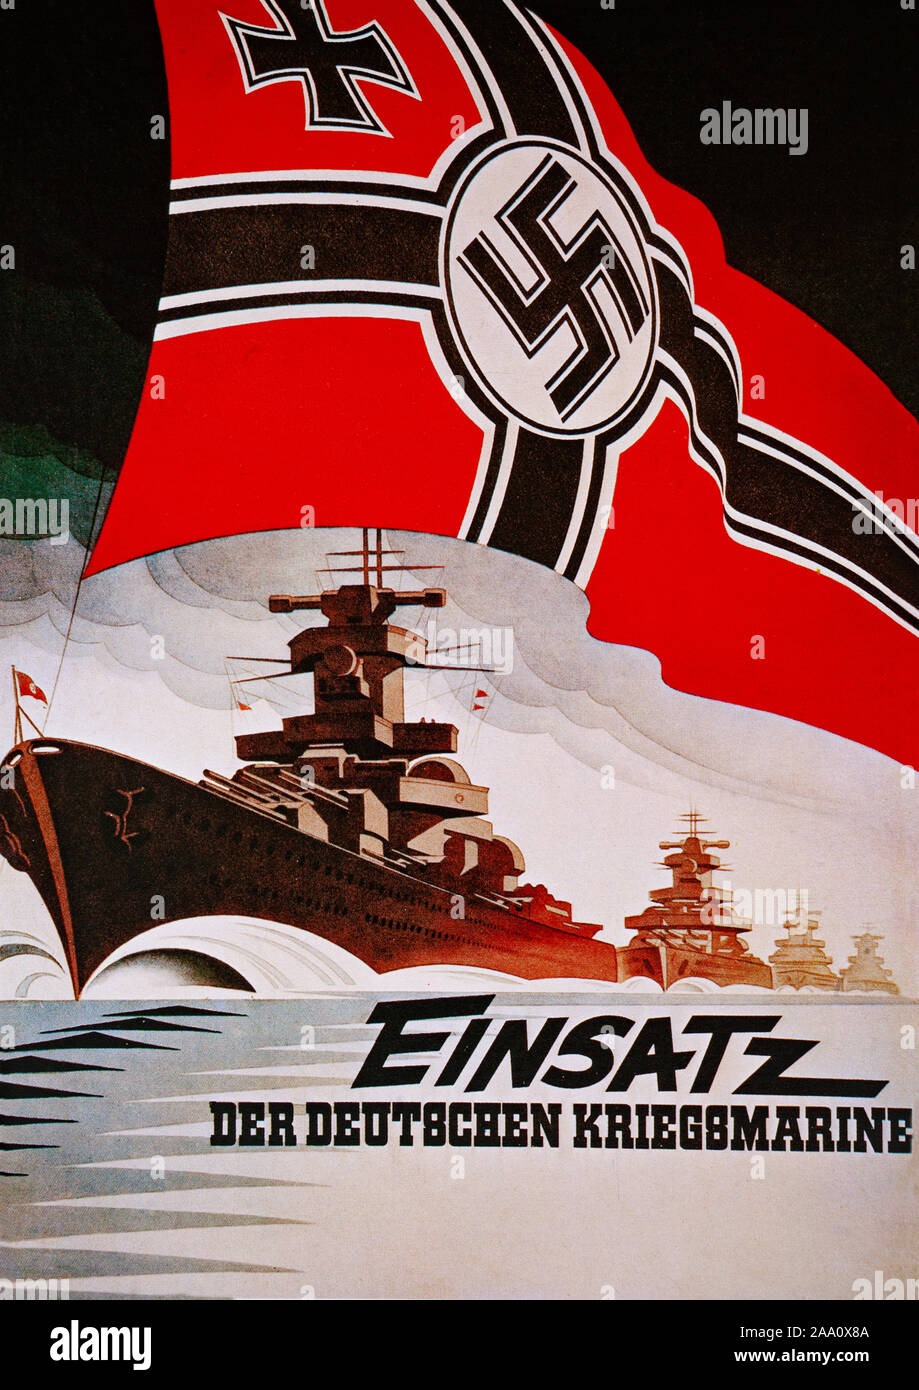 A Second World War recruitment poster for the Kriegsmarine, the navy of Nazi Germany from 1935 to 1945. It superseded the Imperial German Navy of the German Empire (1871–1918) and the inter-war Reichsmarine (1919–1935) of the Weimar Republic. Stock Photo